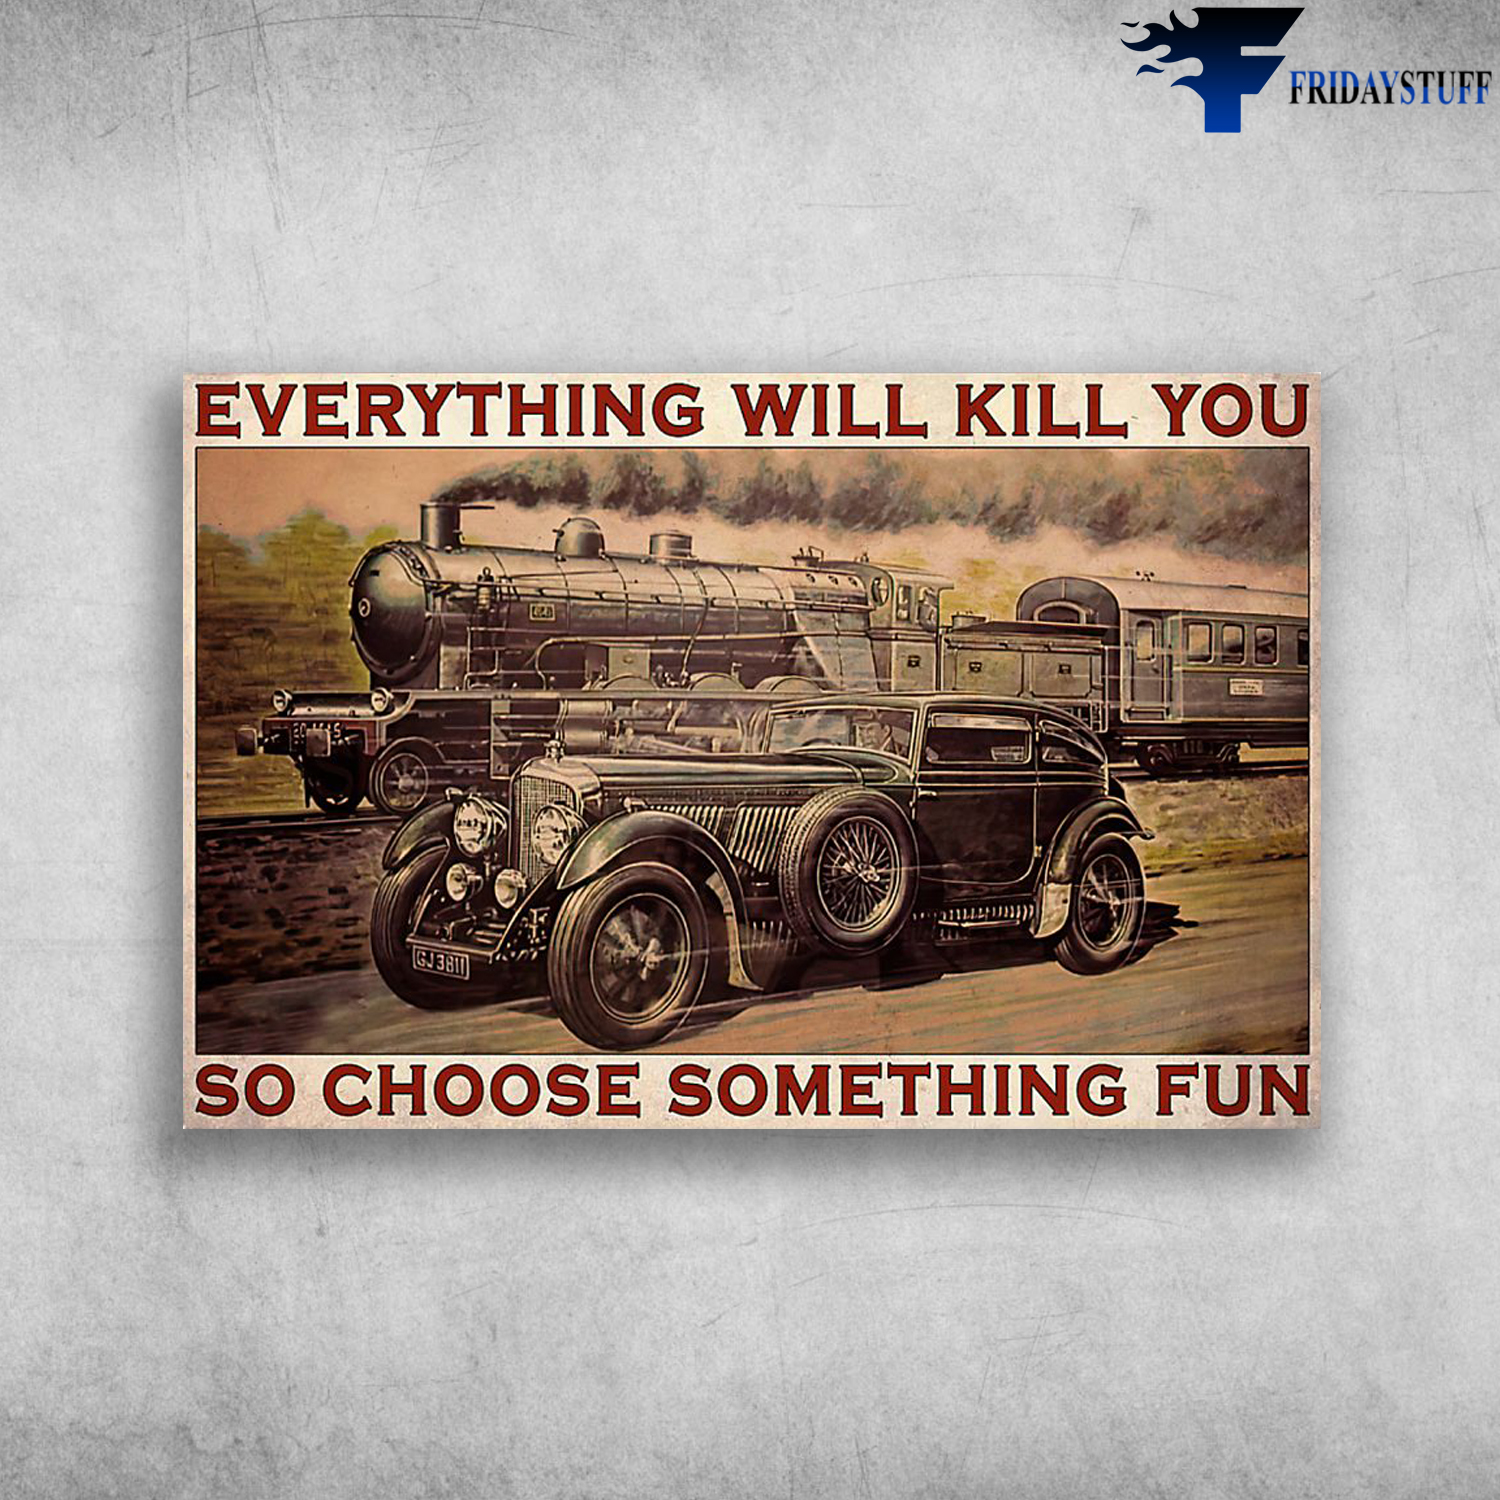 The Hot Rod Is Running Beside The Train - Everything Will Kill You So Choose Something Fun